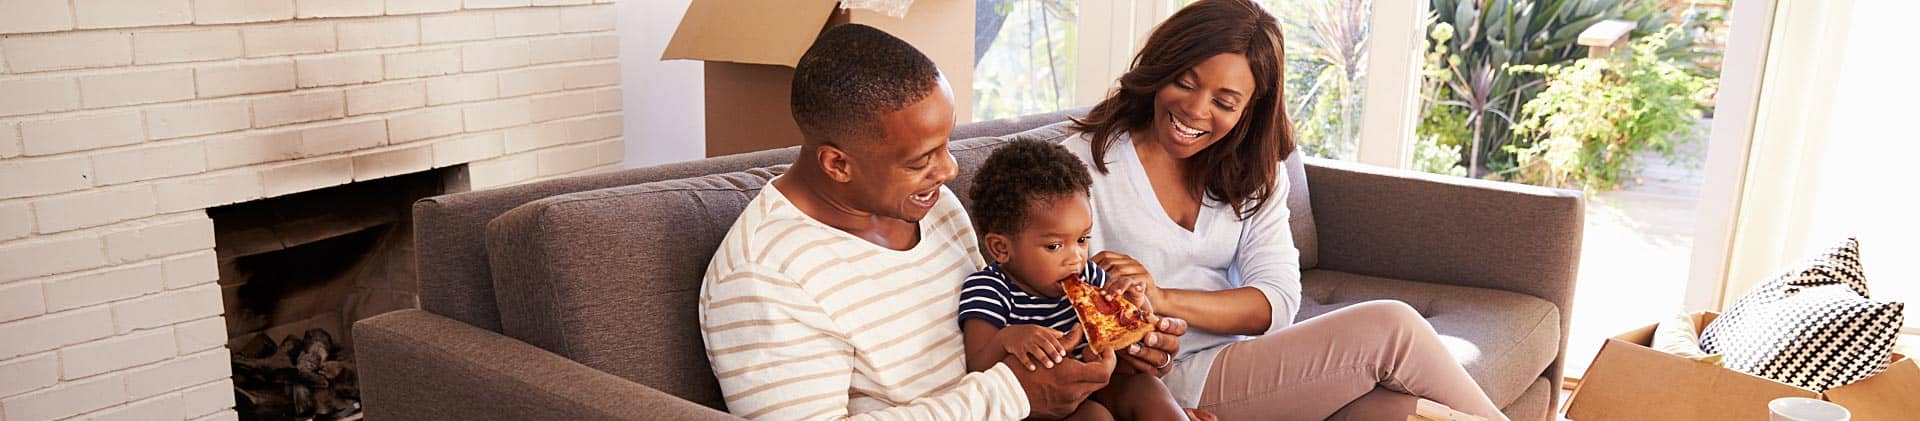 Family enjoying pizze after moving into a new home 